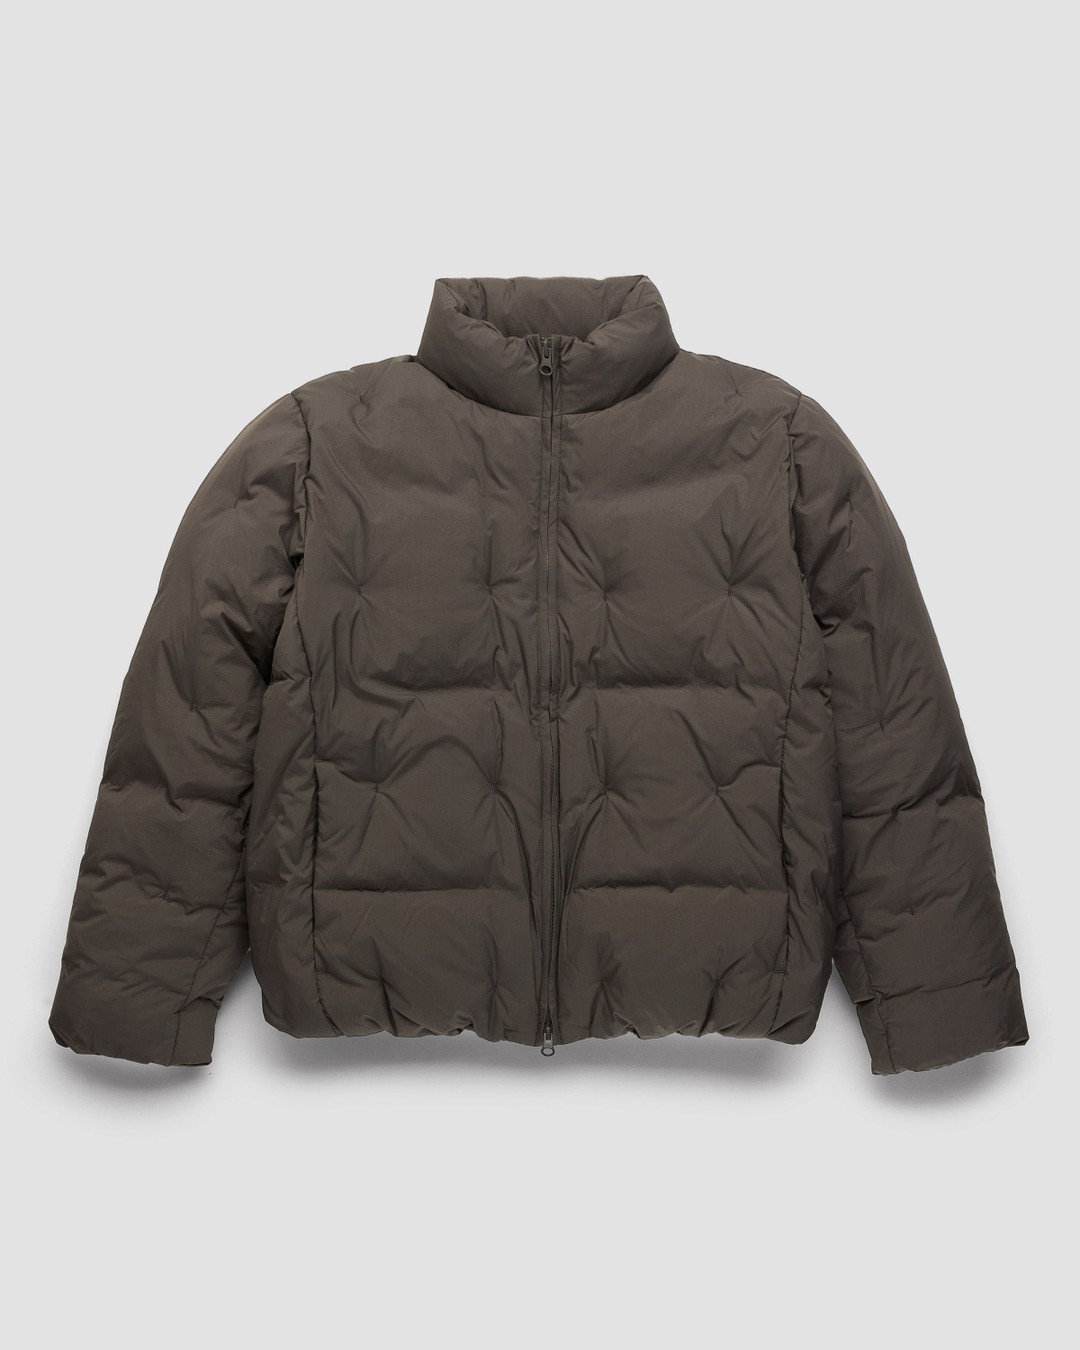 Post Archive Faction (PAF) – 5.0 Down Right Jacket Brown